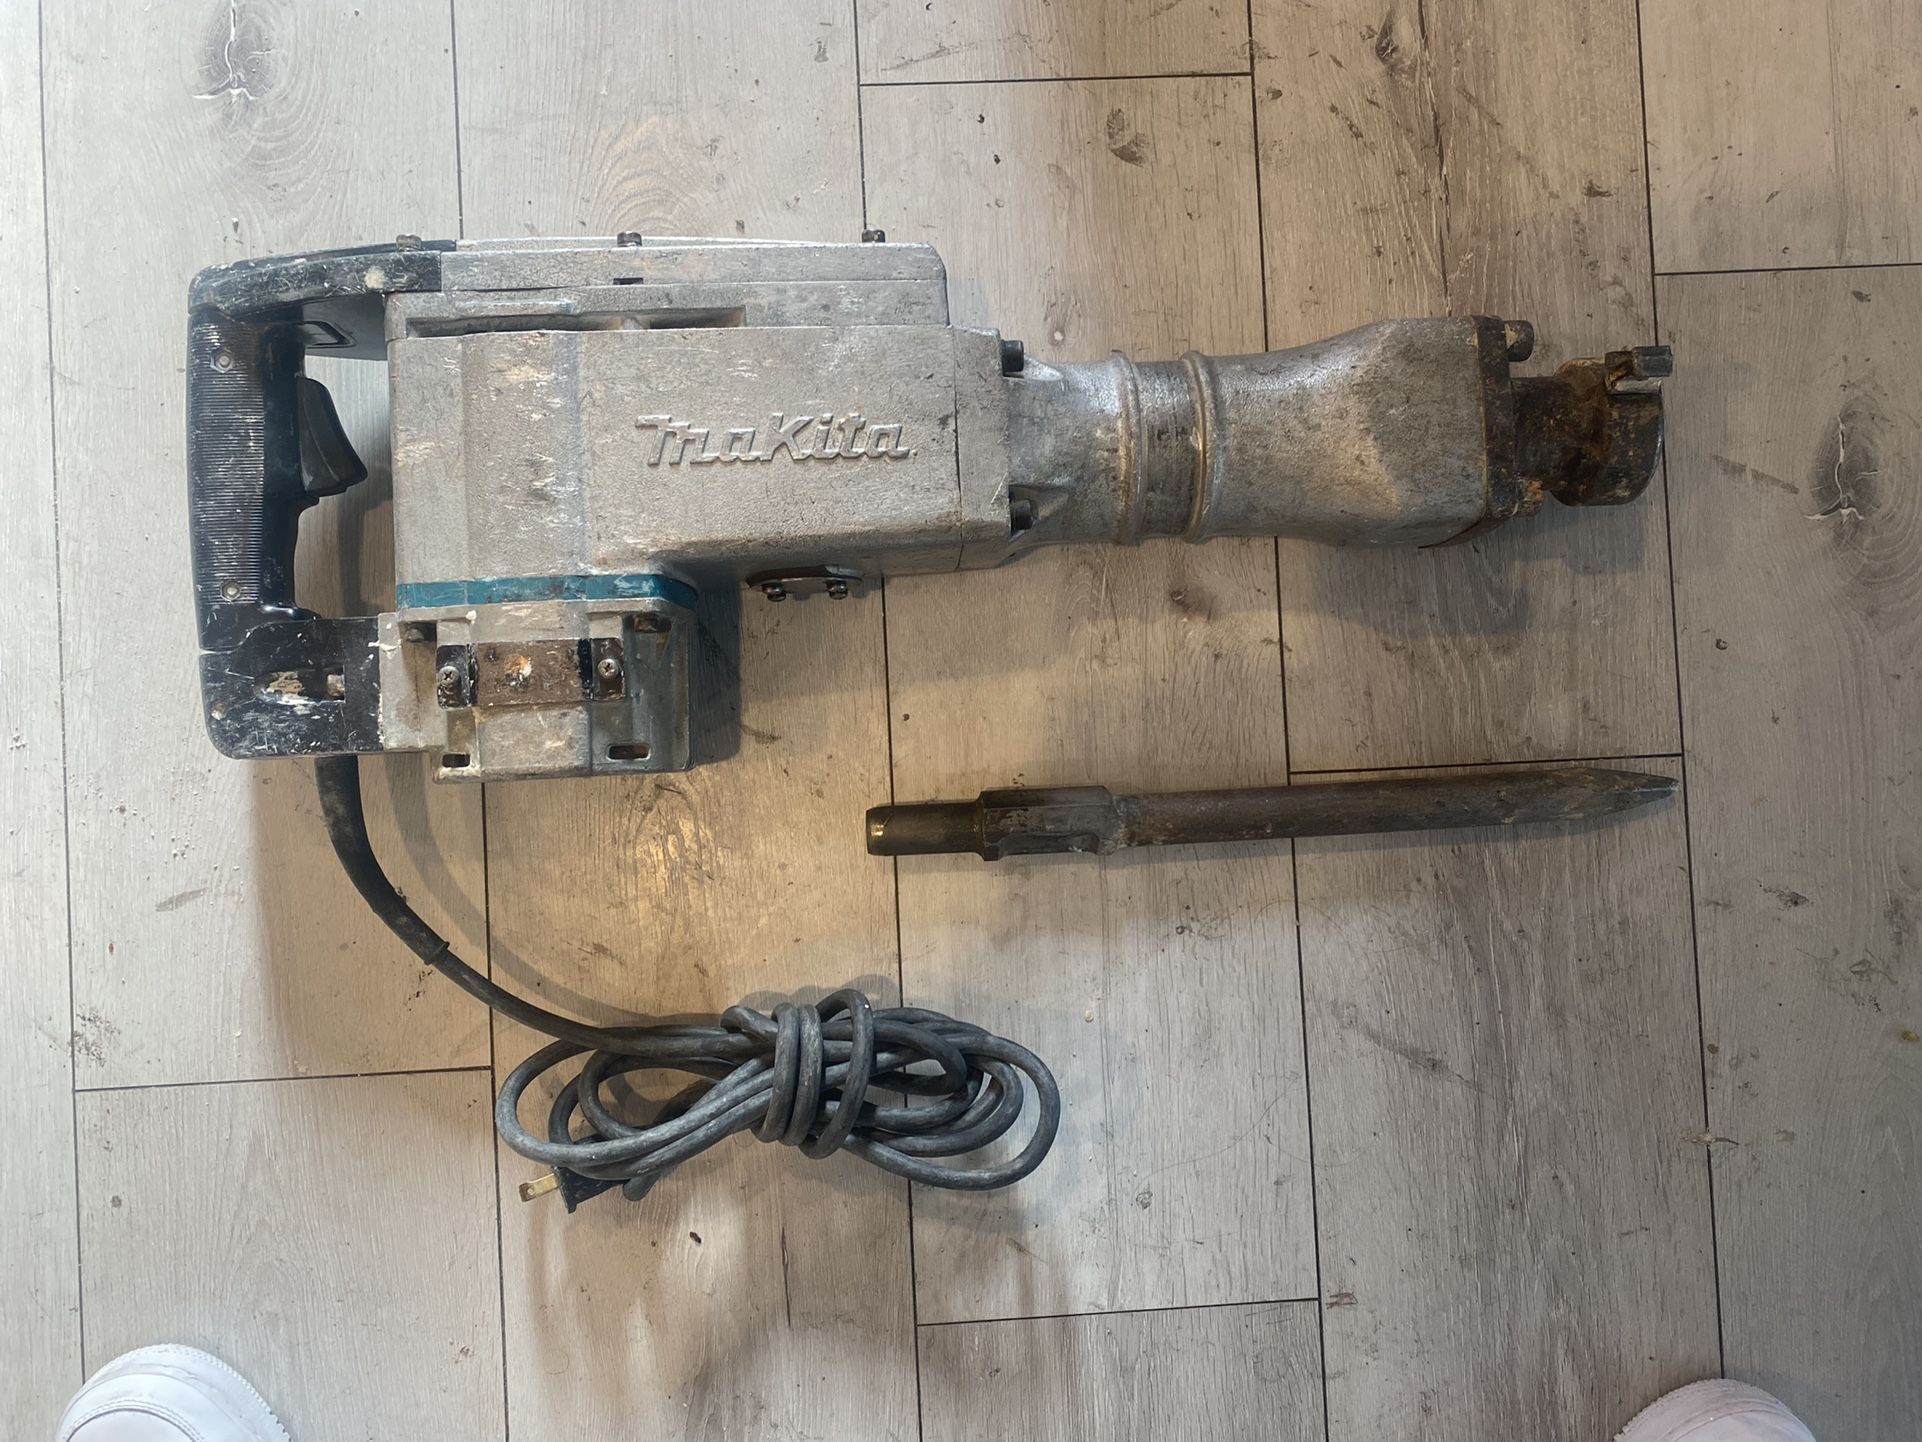 Makita HPM 1500 Heavy Duty Demolition Demo Jack Hammer 400$ working like  new. Or best offer. for Sale in Wilmington, CA - OfferUp